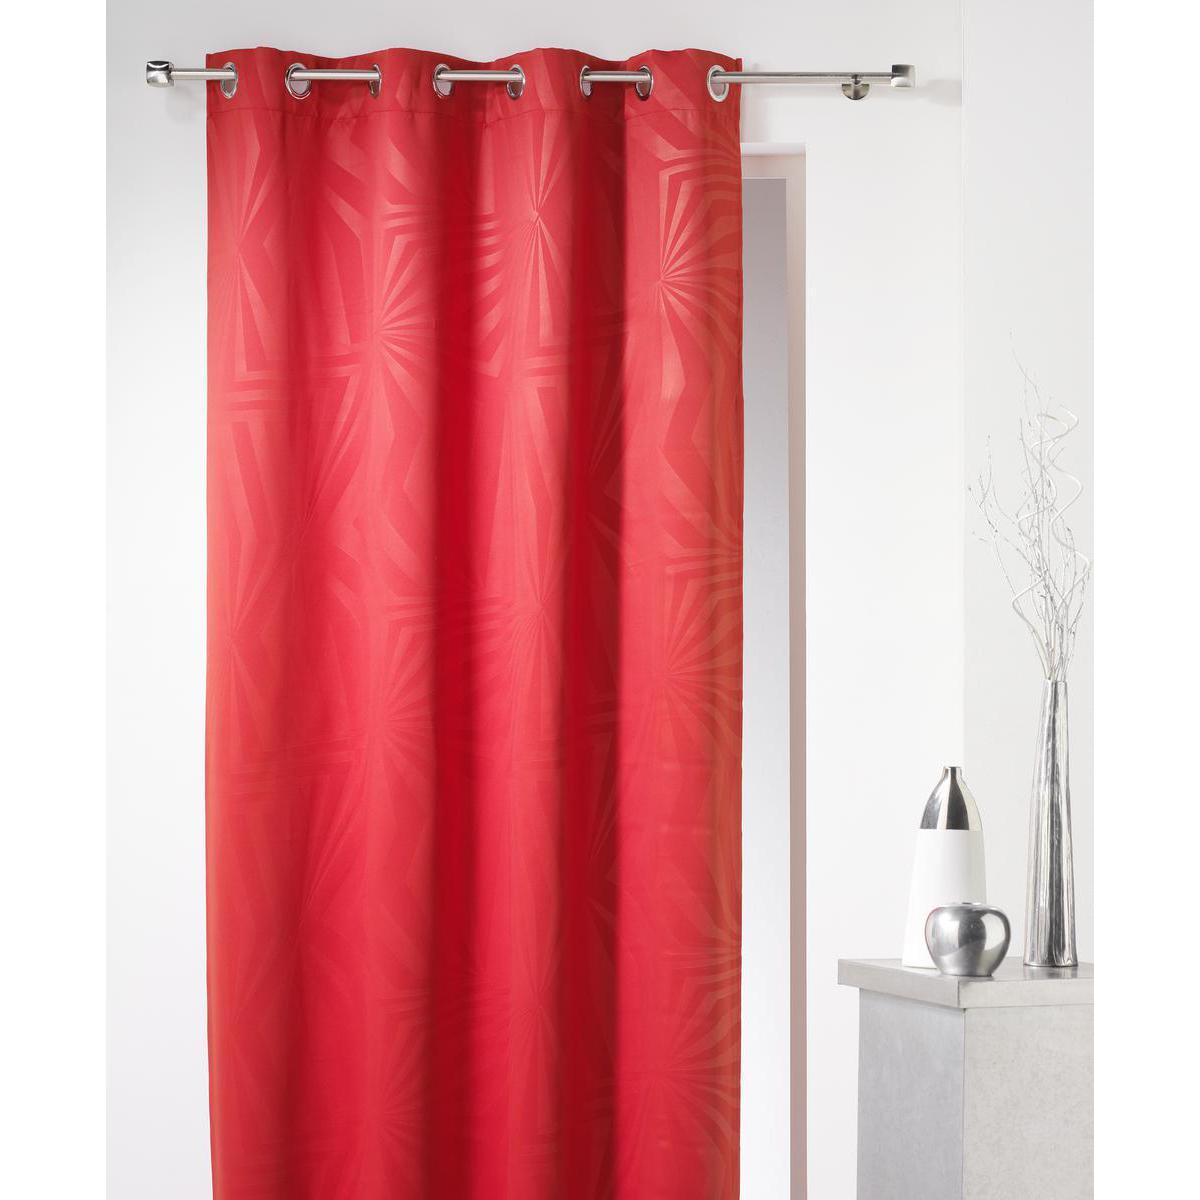 Rideau occultant Oxford en polyester - 140 x 240 cm - Rouge